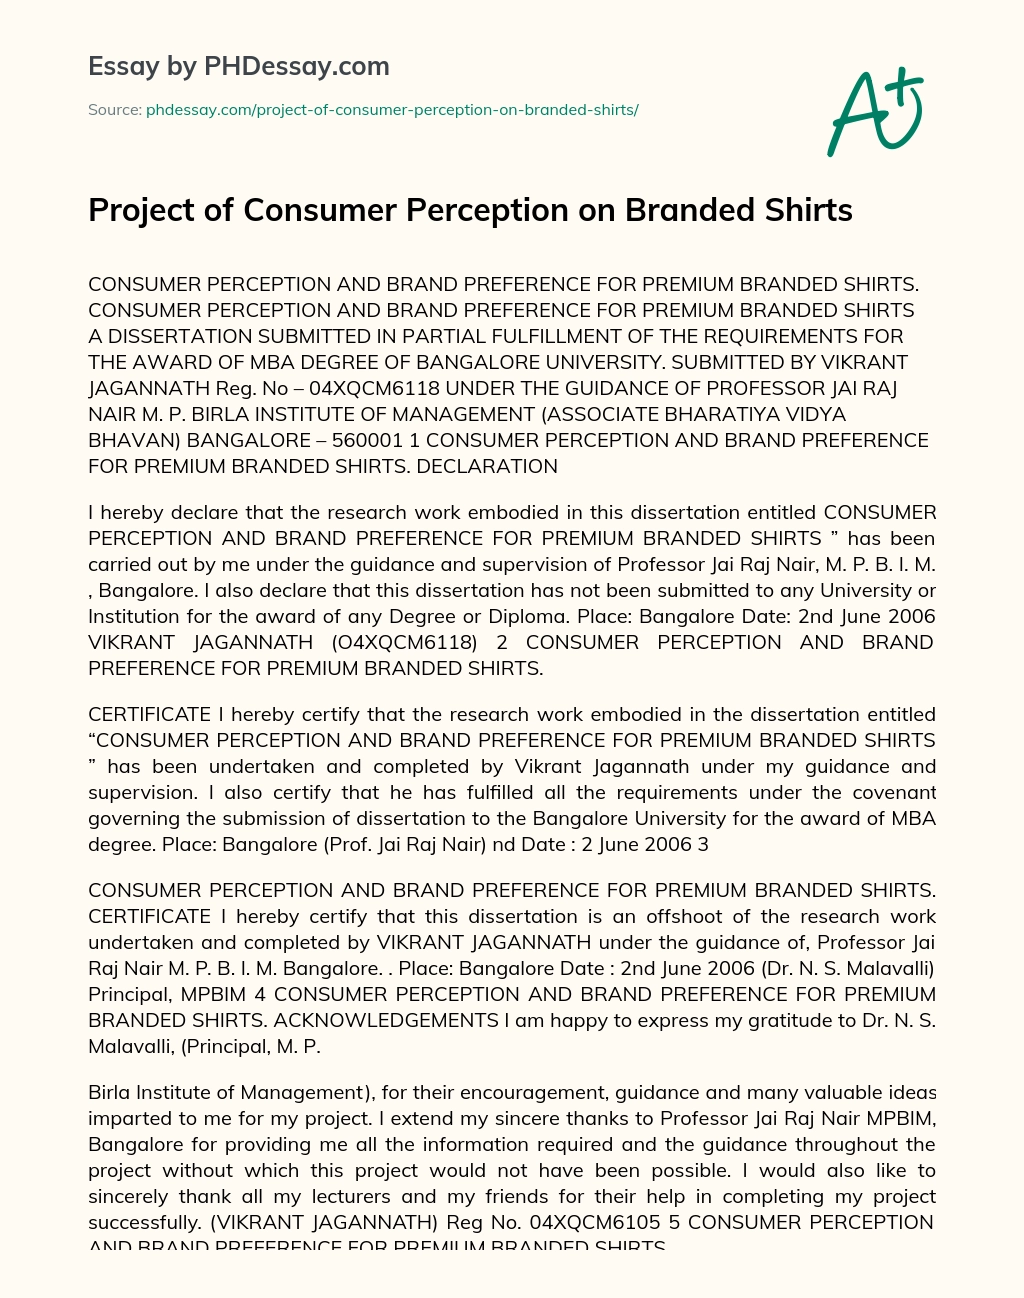 Project of Consumer Perception on Branded Shirts essay